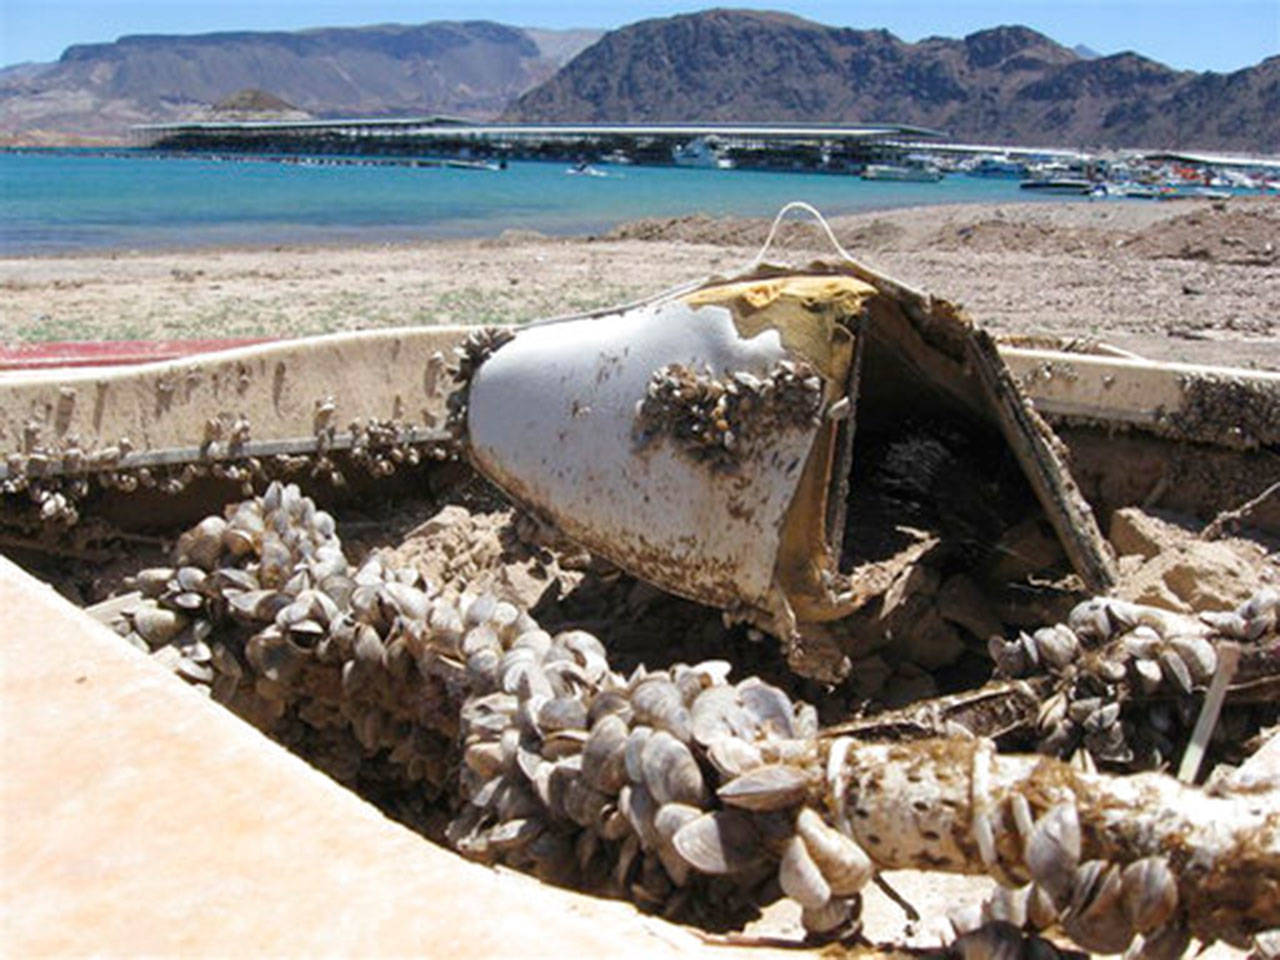 In this July 6, 2009, photo, invasive quagga mussels cover a formerly sunken boat at Lake Mead in Lake Mead National Recreation Area in Nevada. (Felicia Fonseca/The Associated Press)